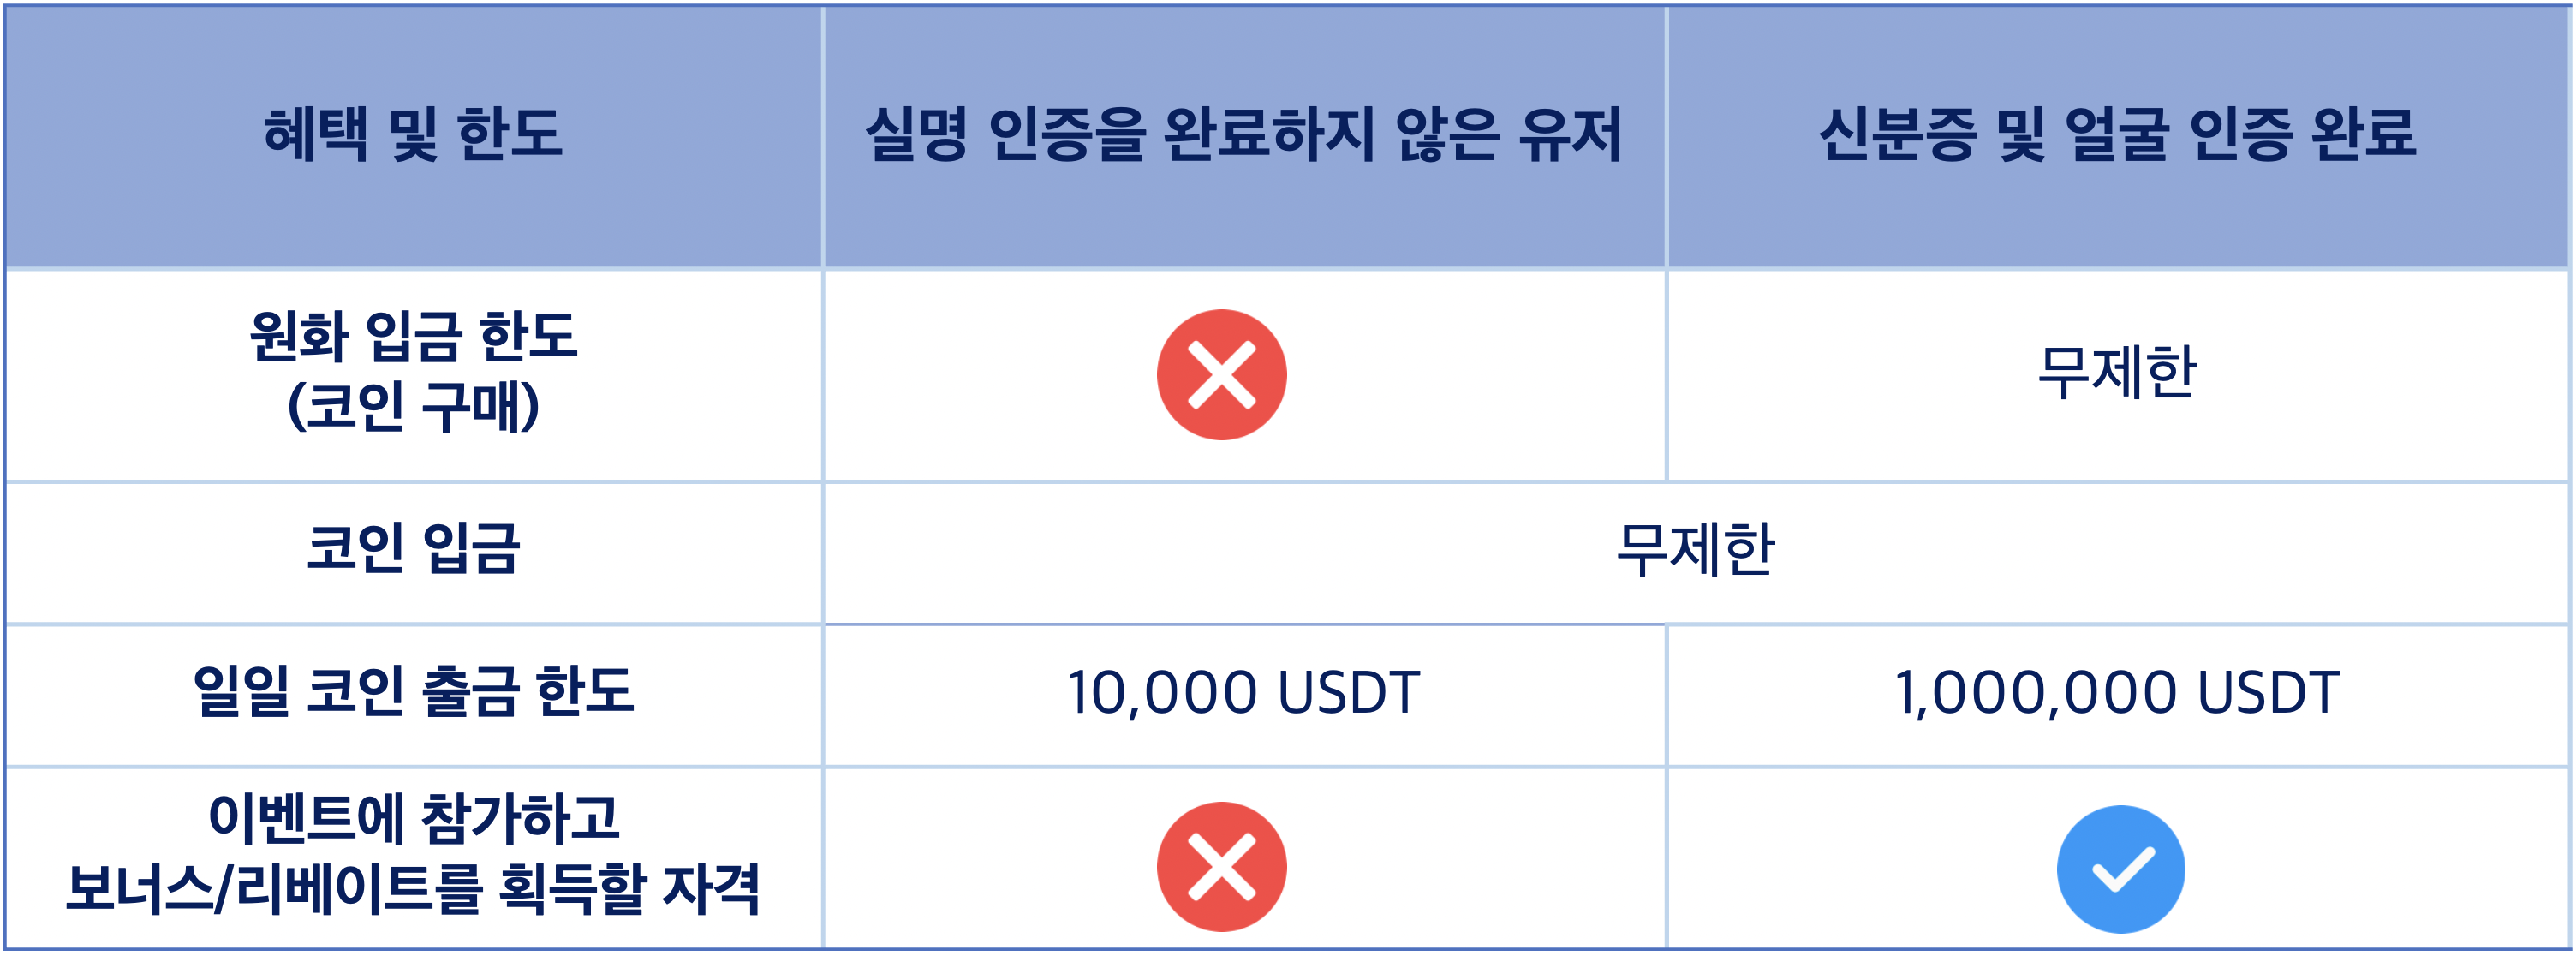 202311_updated_Table-KR.png